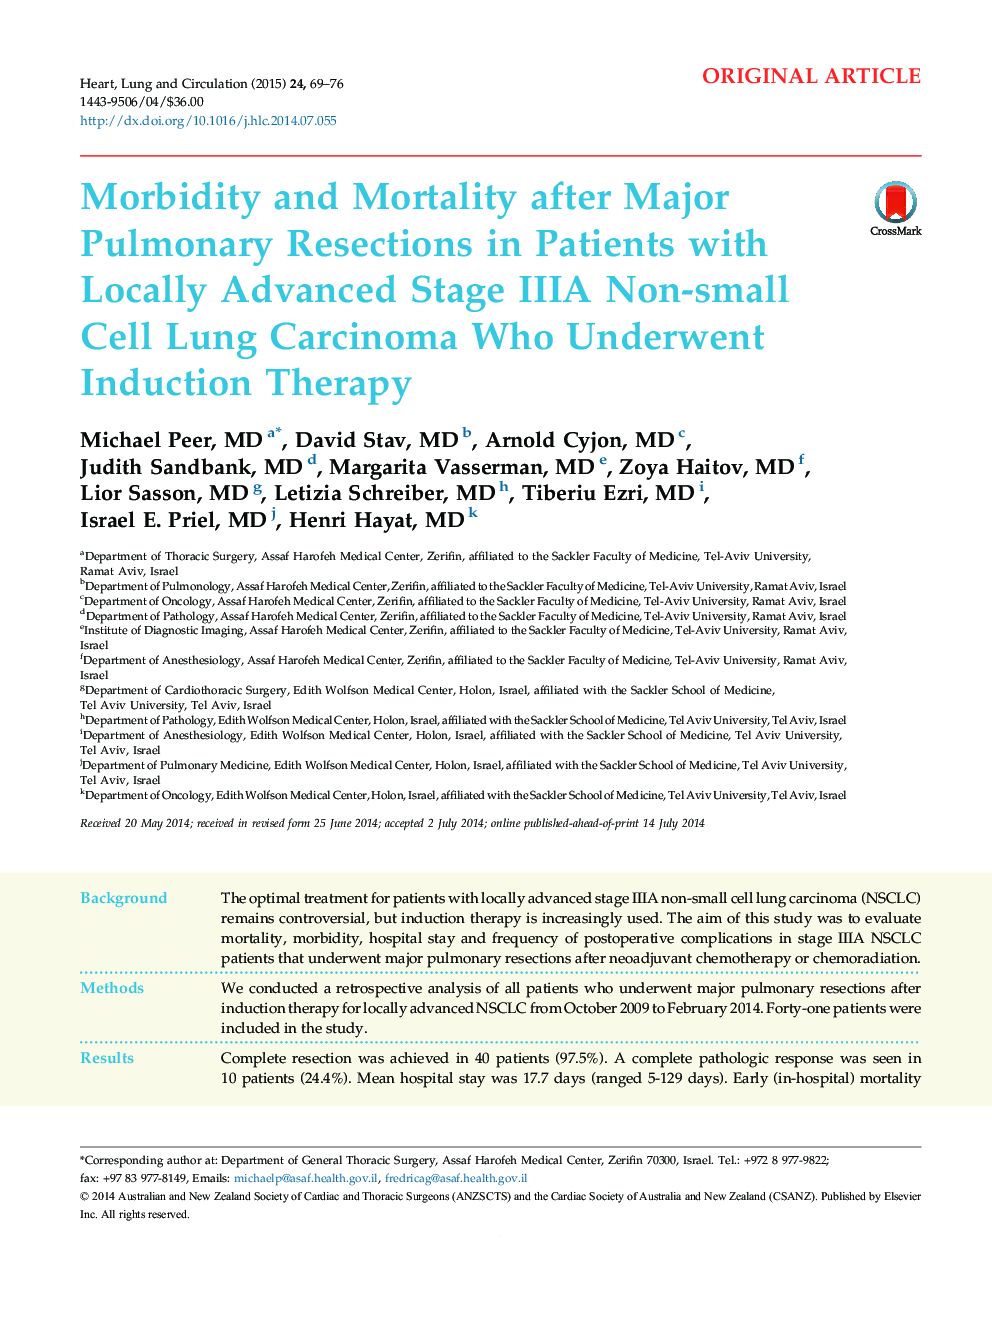 Morbidity and Mortality after Major Pulmonary Resections in Patients with Locally Advanced Stage IIIA Non-small Cell Lung Carcinoma Who Underwent Induction Therapy